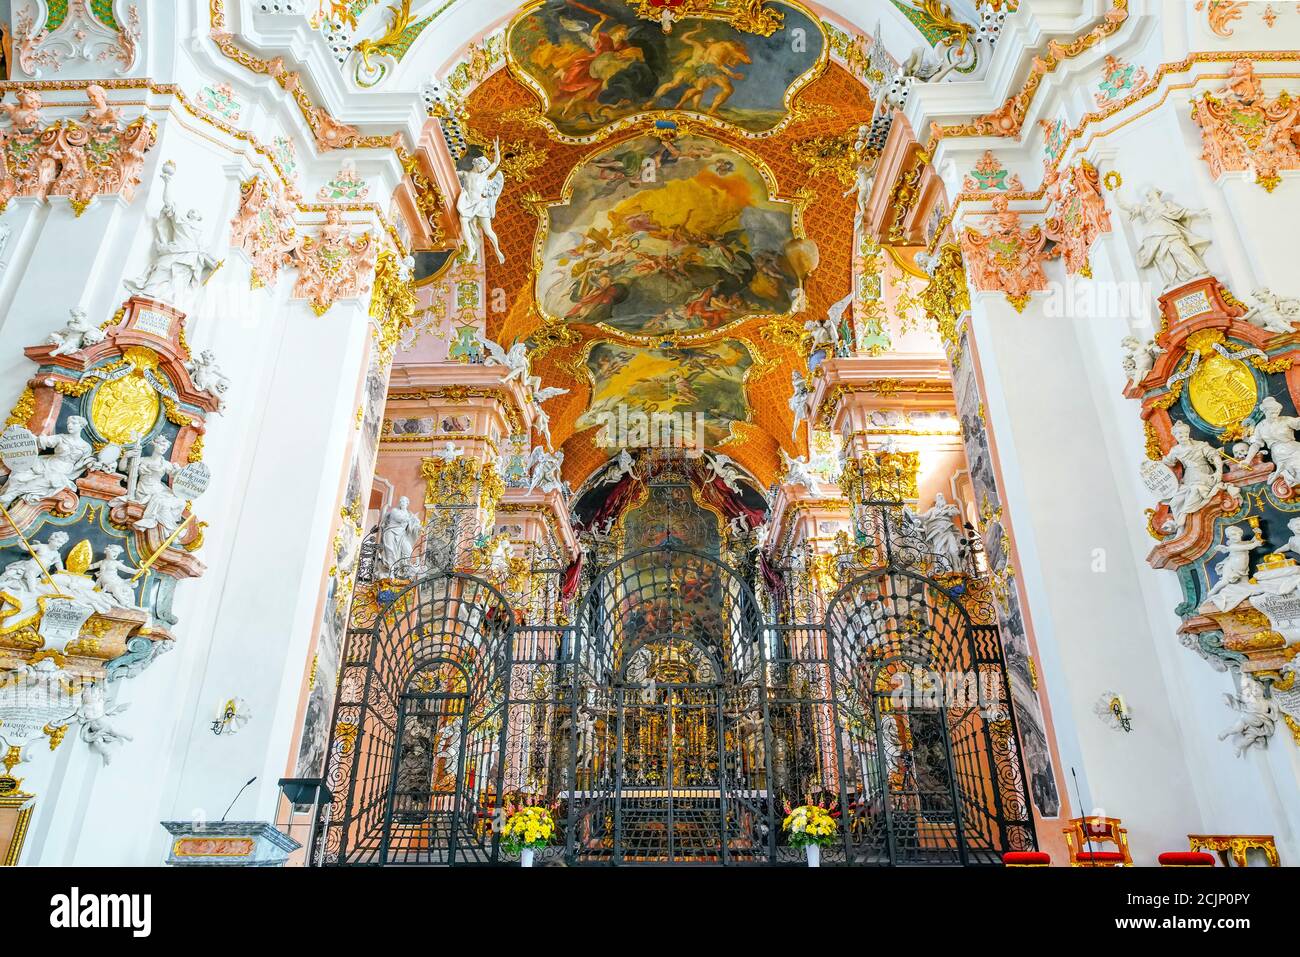 Details of the ceiling paintings in famous Benedictine Abbey of Our Lady of the Hermits in Pilgrimage Town of Einsiedeln (city’s name-means hermitage) Stock Photo